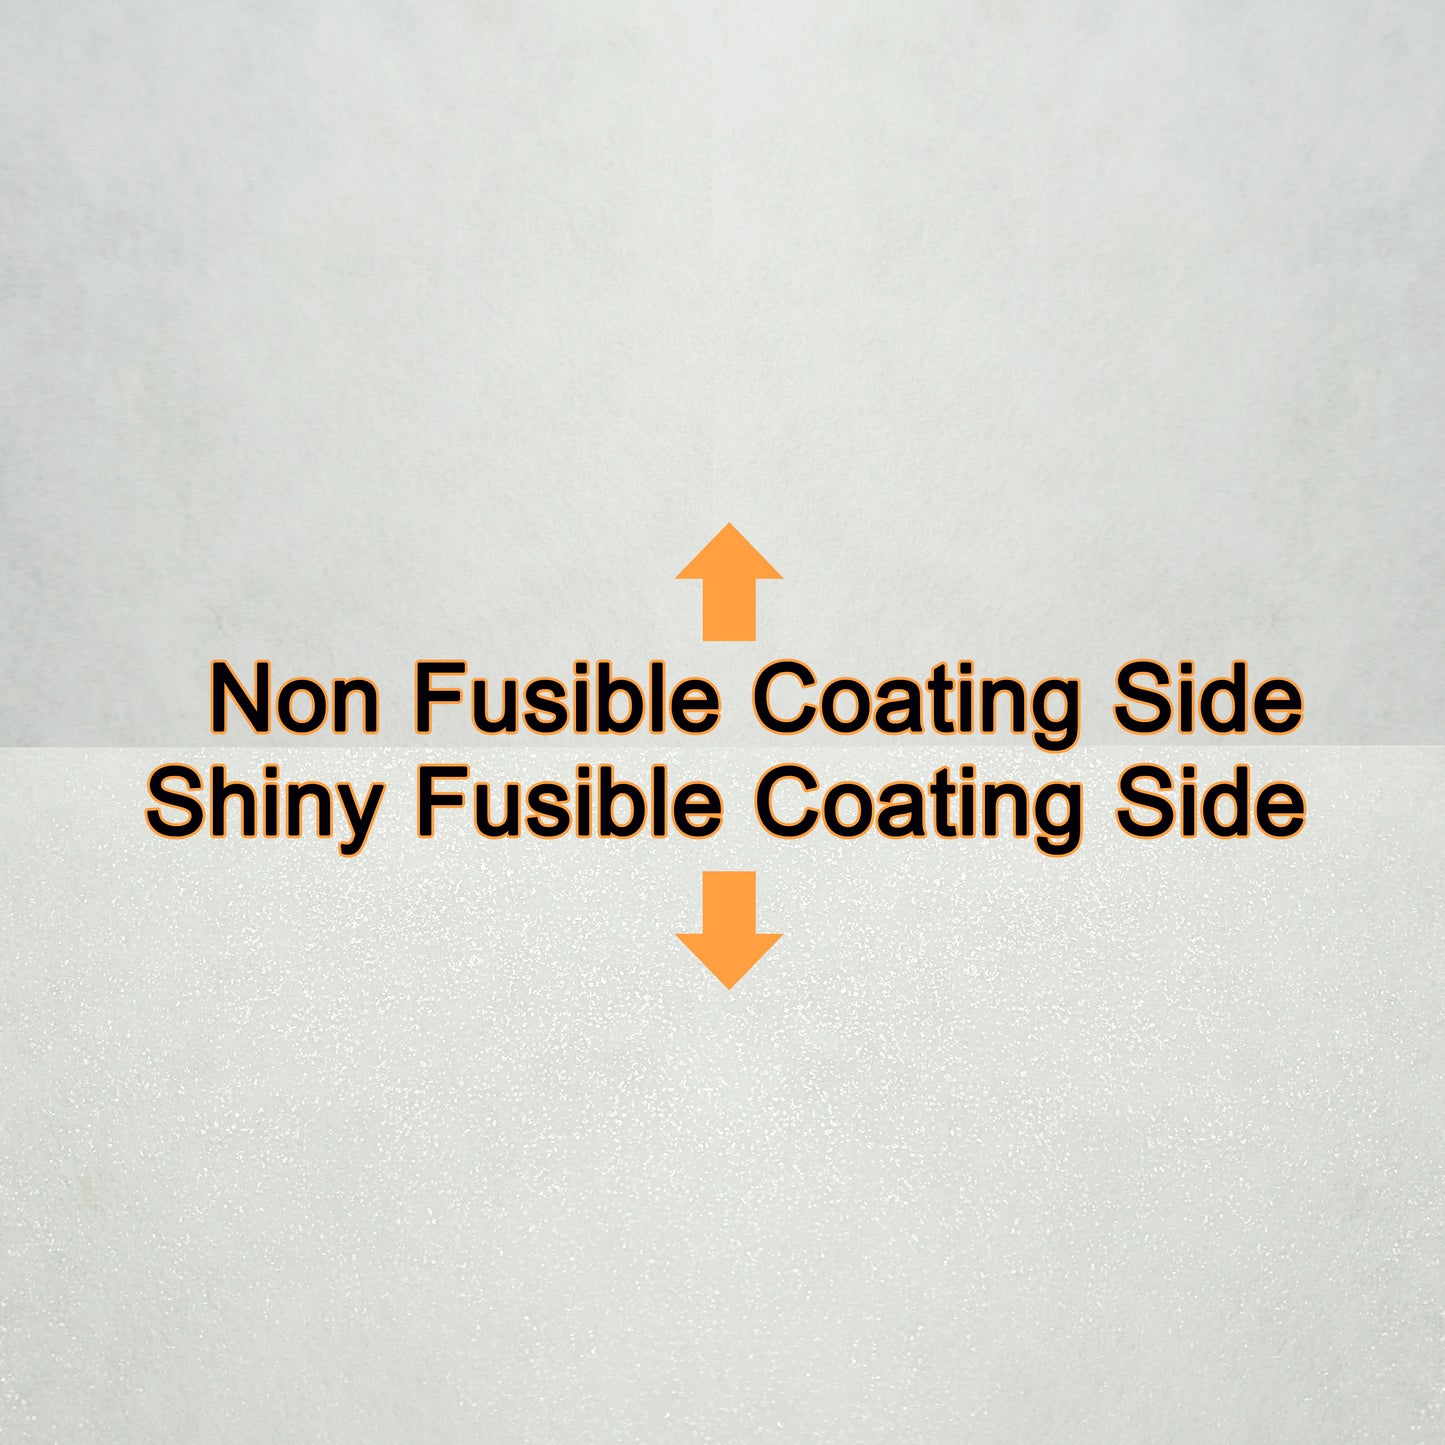 New brothread Fusible Iron on Cut Away Machine Embroidery Stabilizer Backing 12" x 25 Yd roll - Medium Weight 2.5 oz